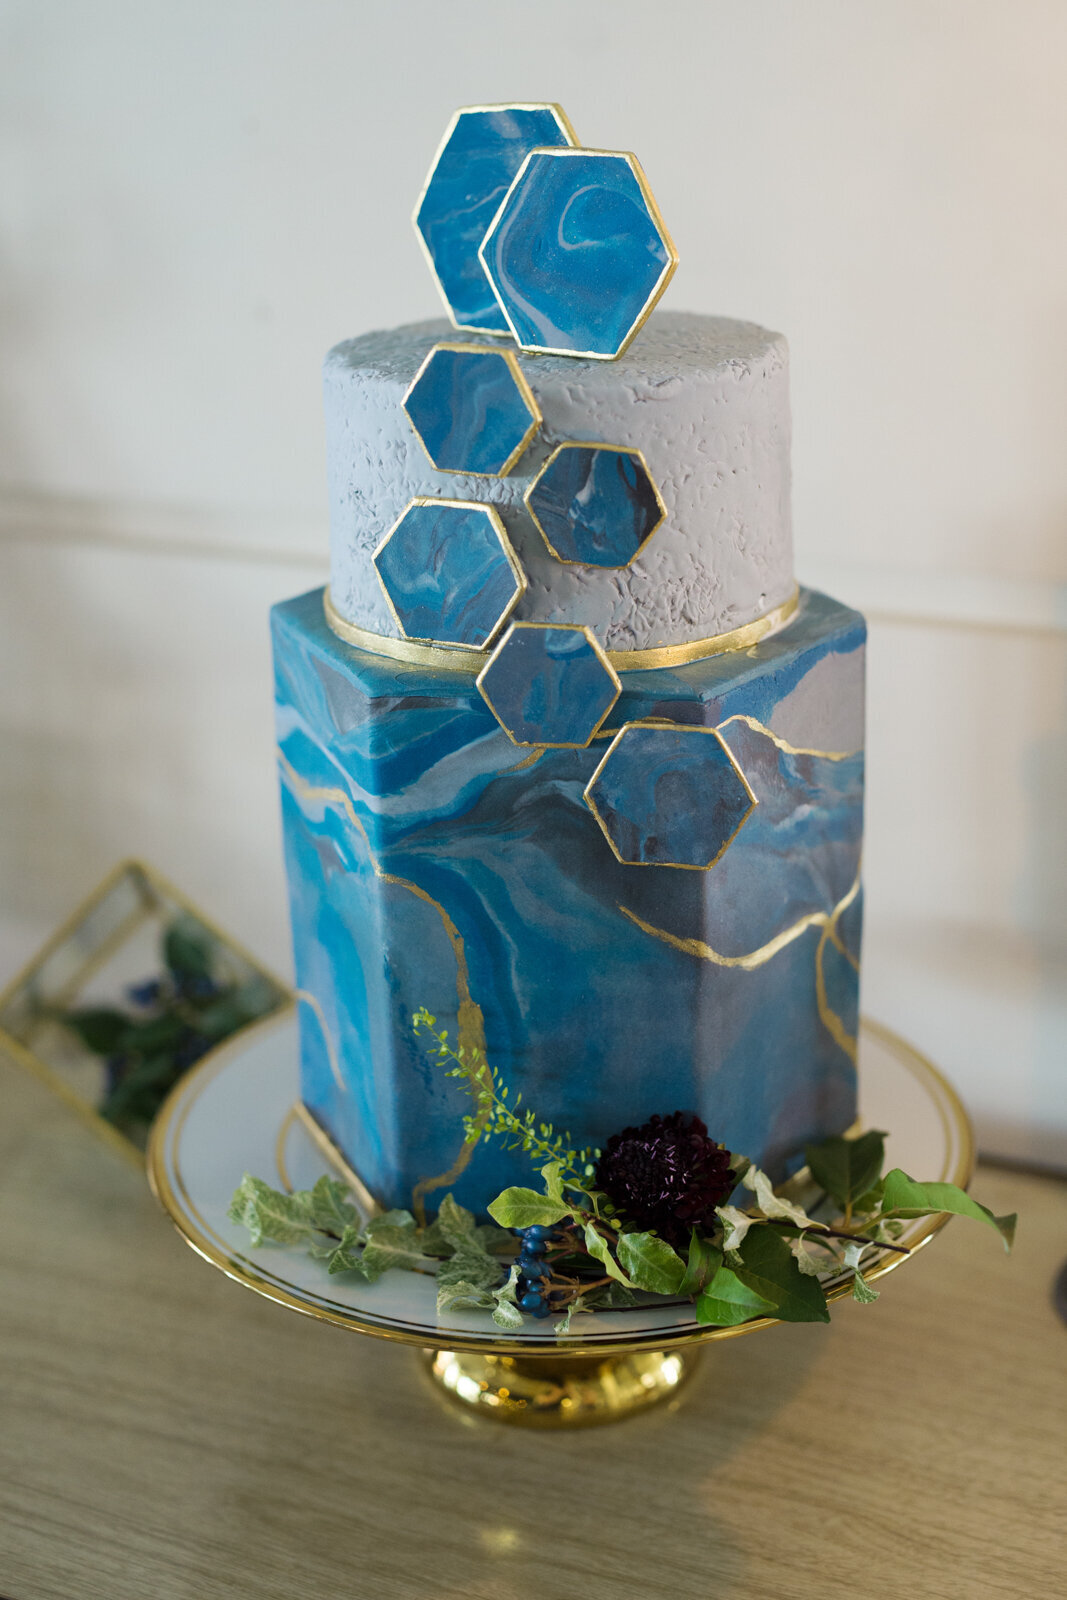 Trendy, two-tiered, blue and gold marbled wedding cake with geometric shapes created by Bake My Day, contemporary cakes & desserts in Calgary, Alberta, featured on the Brontë Bride Vendor Guide.